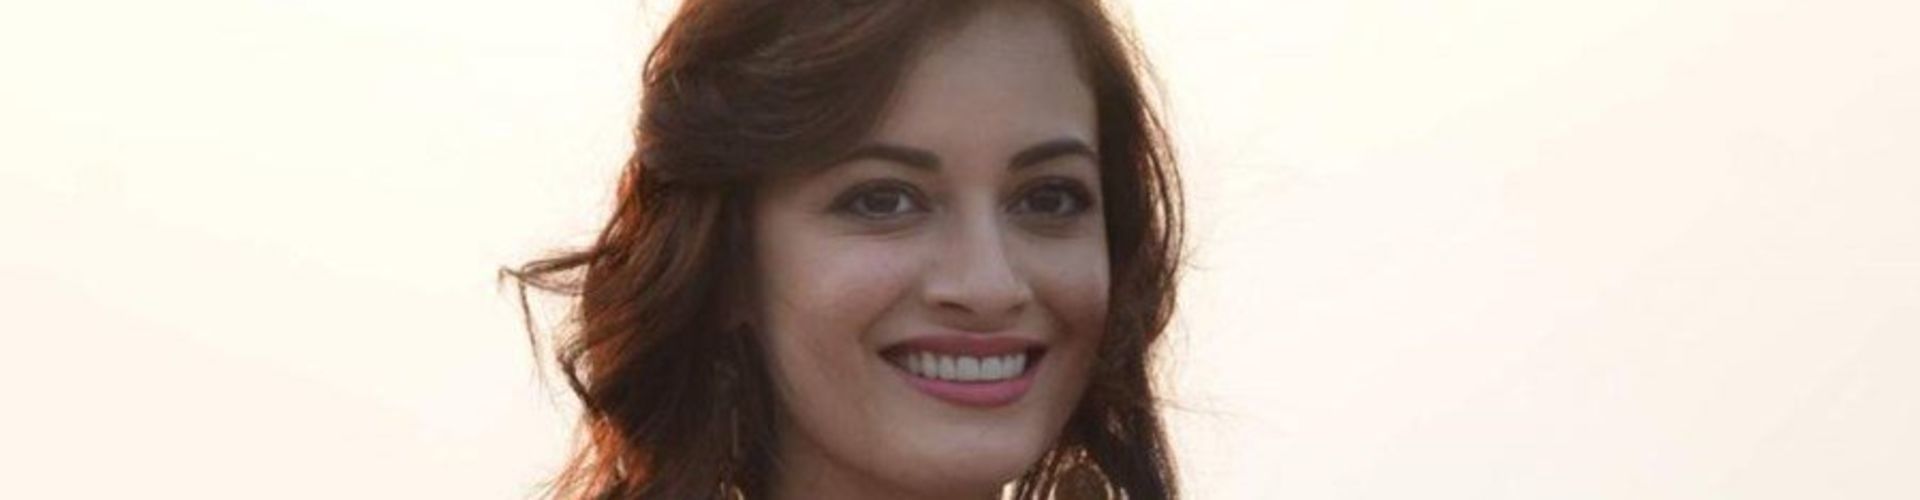 It’s a waste of time to make a film if you don’t have something special to say in the name of entertainment says Dia Mirza